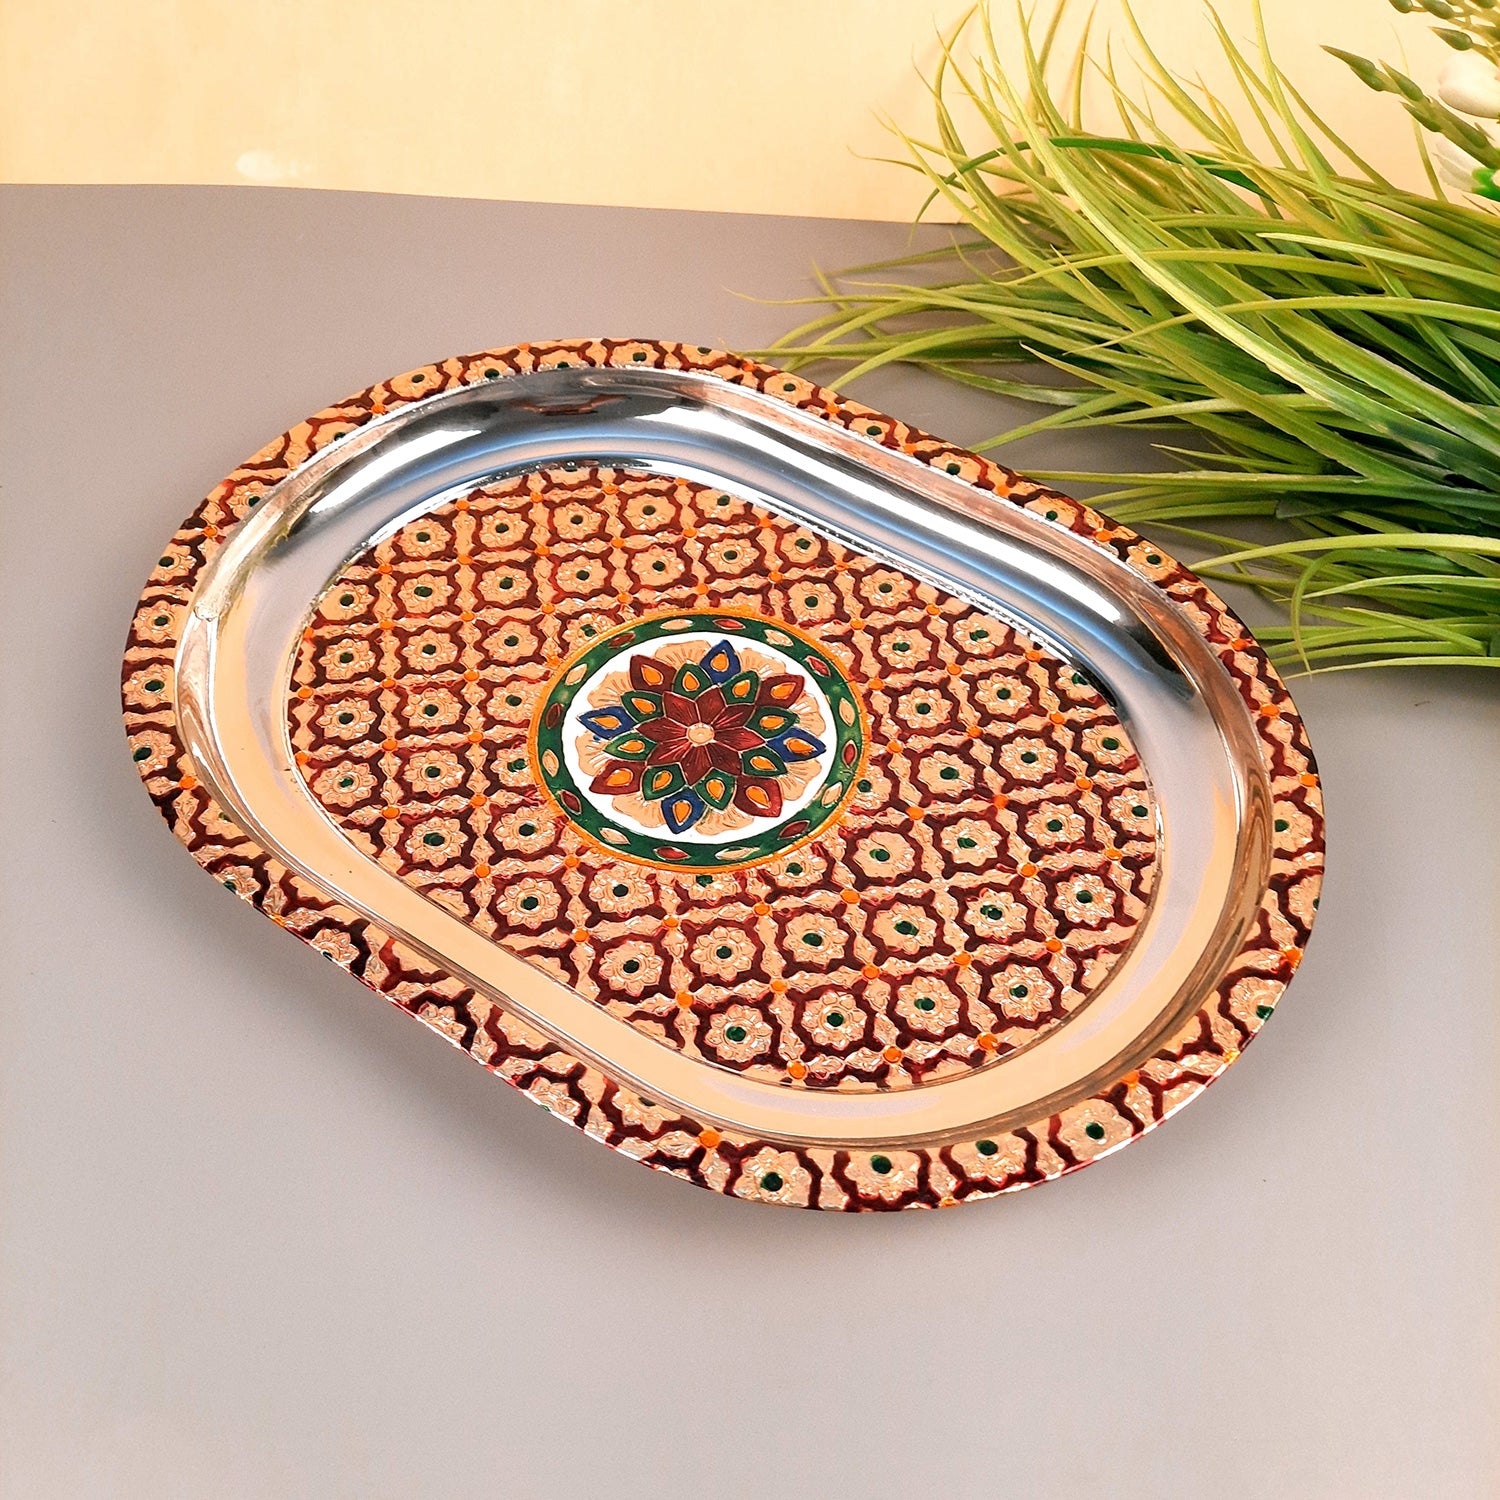 Serving Trays For Tea, Coffee & Snacks | Steel Tray | Multipurpose Decorative Tray & Platters - For Home, Dining Table Organization, Kitchen & Gifts - 15 Inch